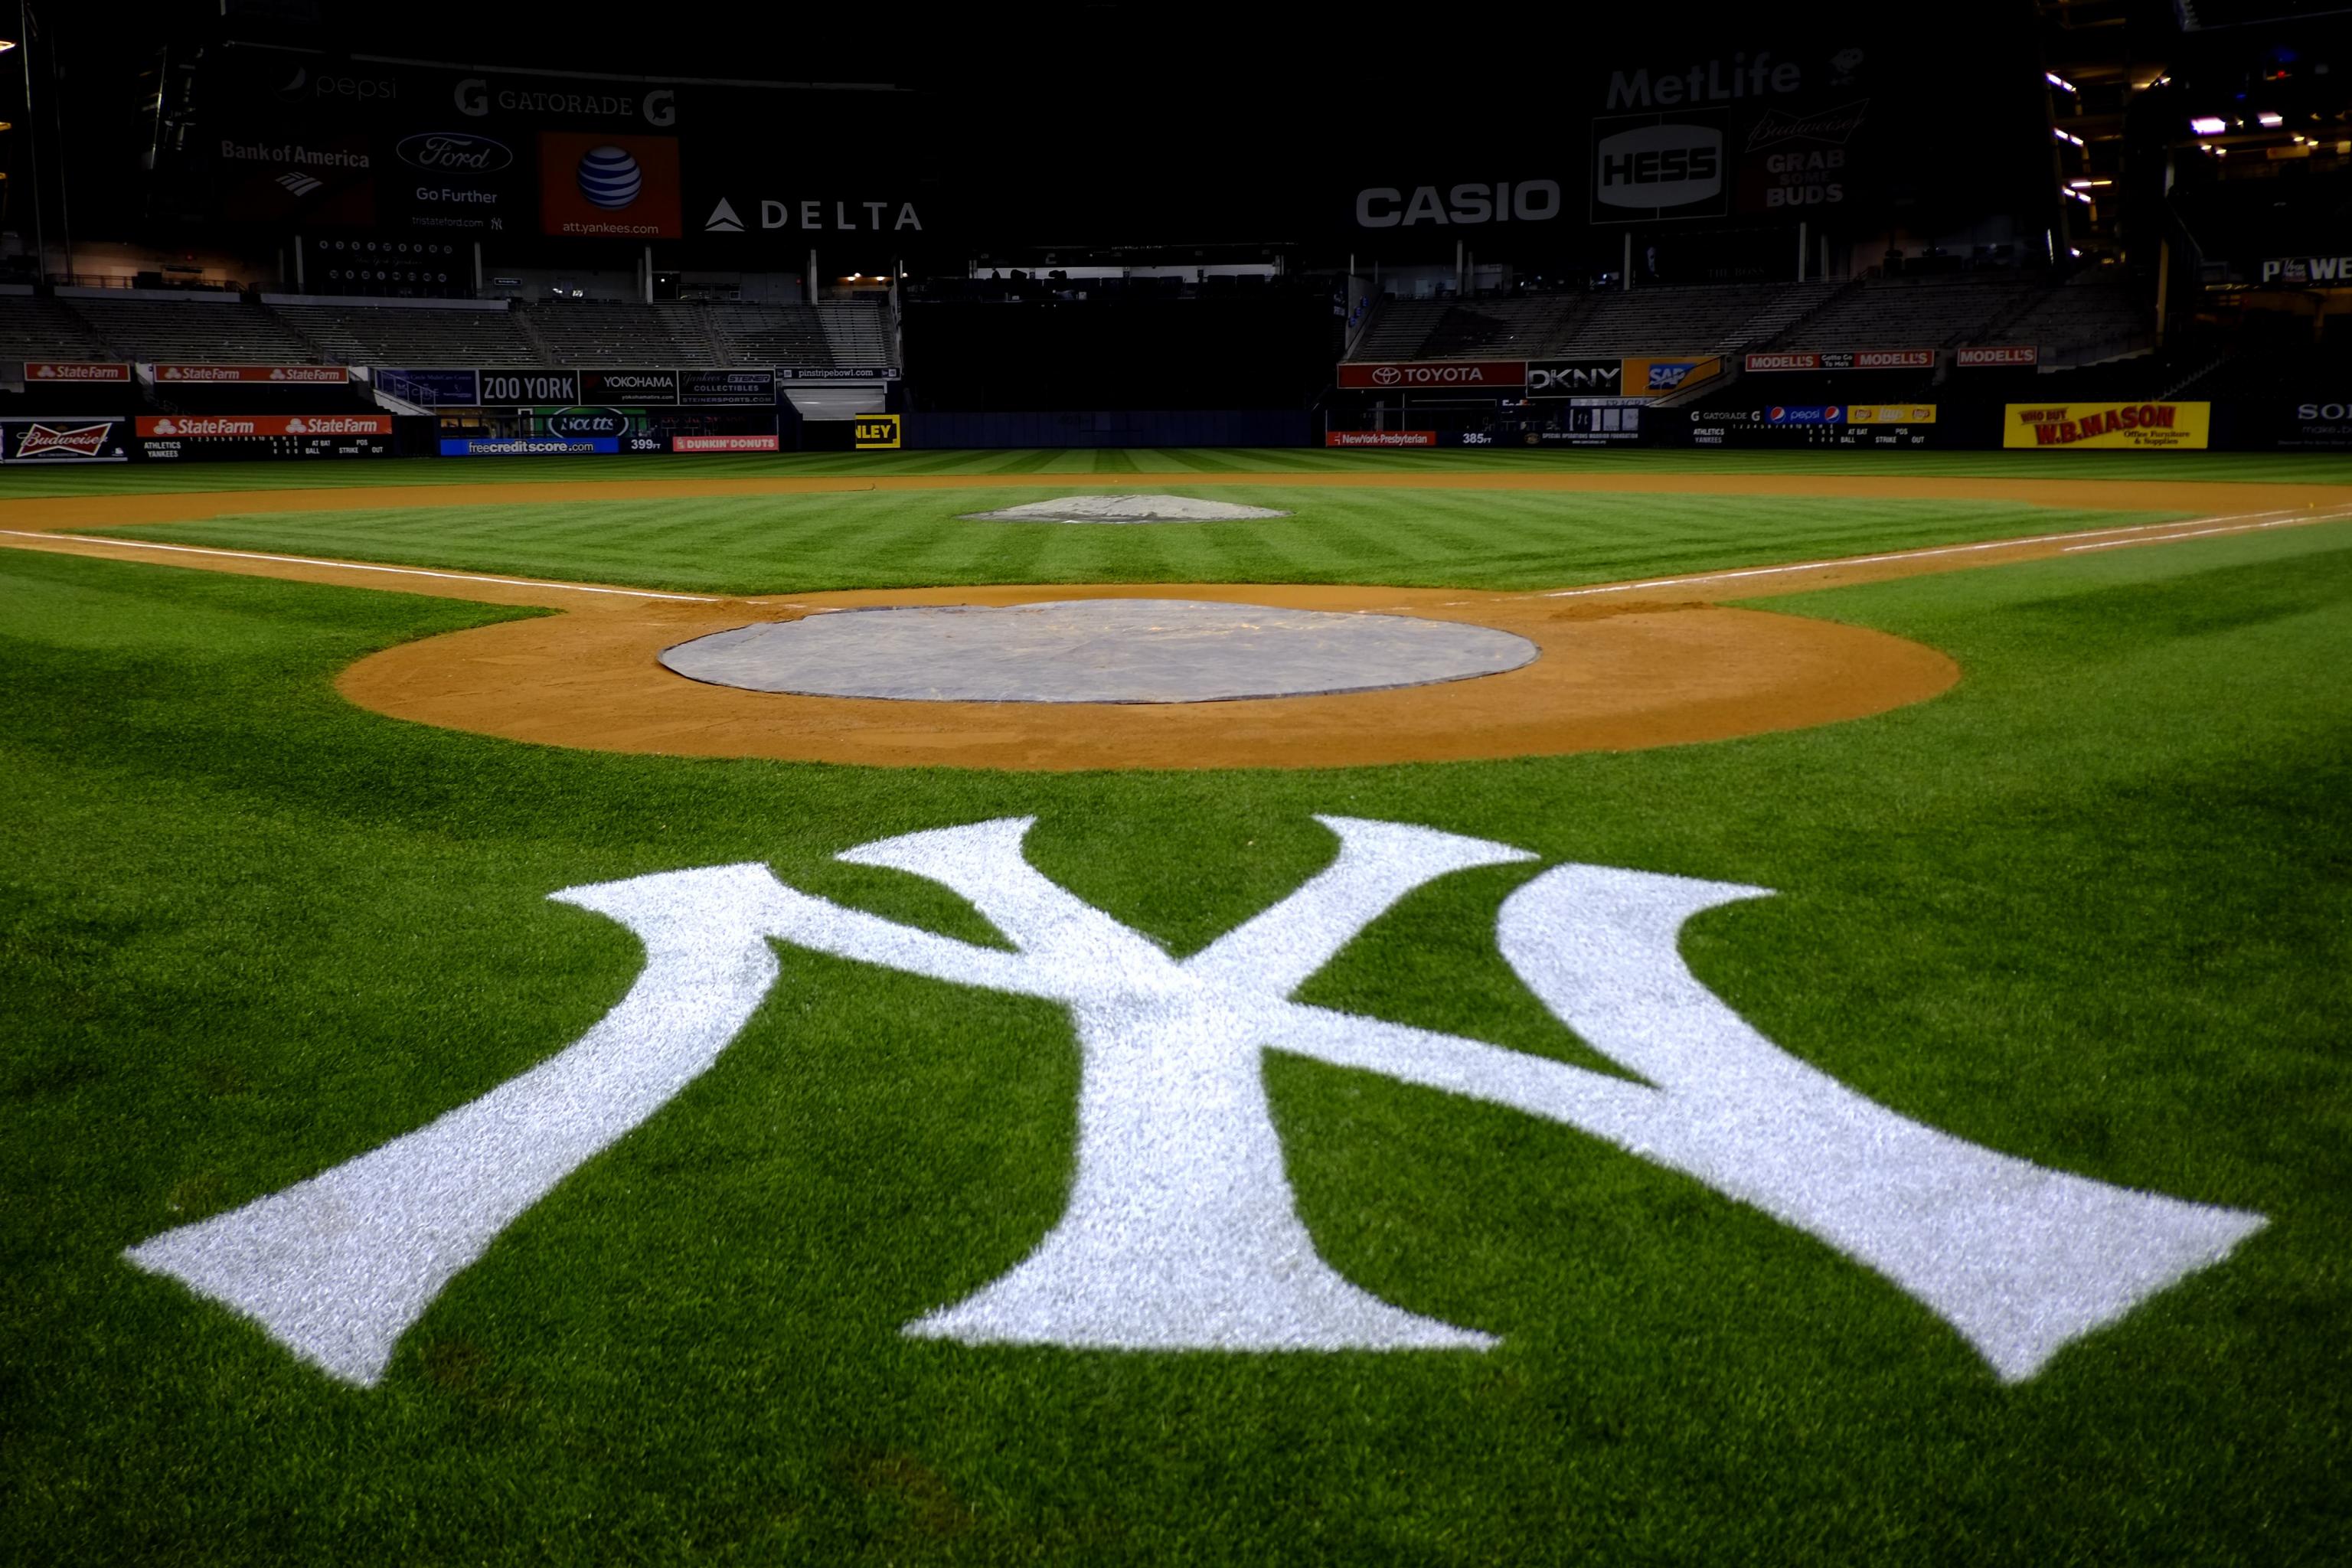 Prized prospect Jasson Domínguez becomes youngest Yankees player